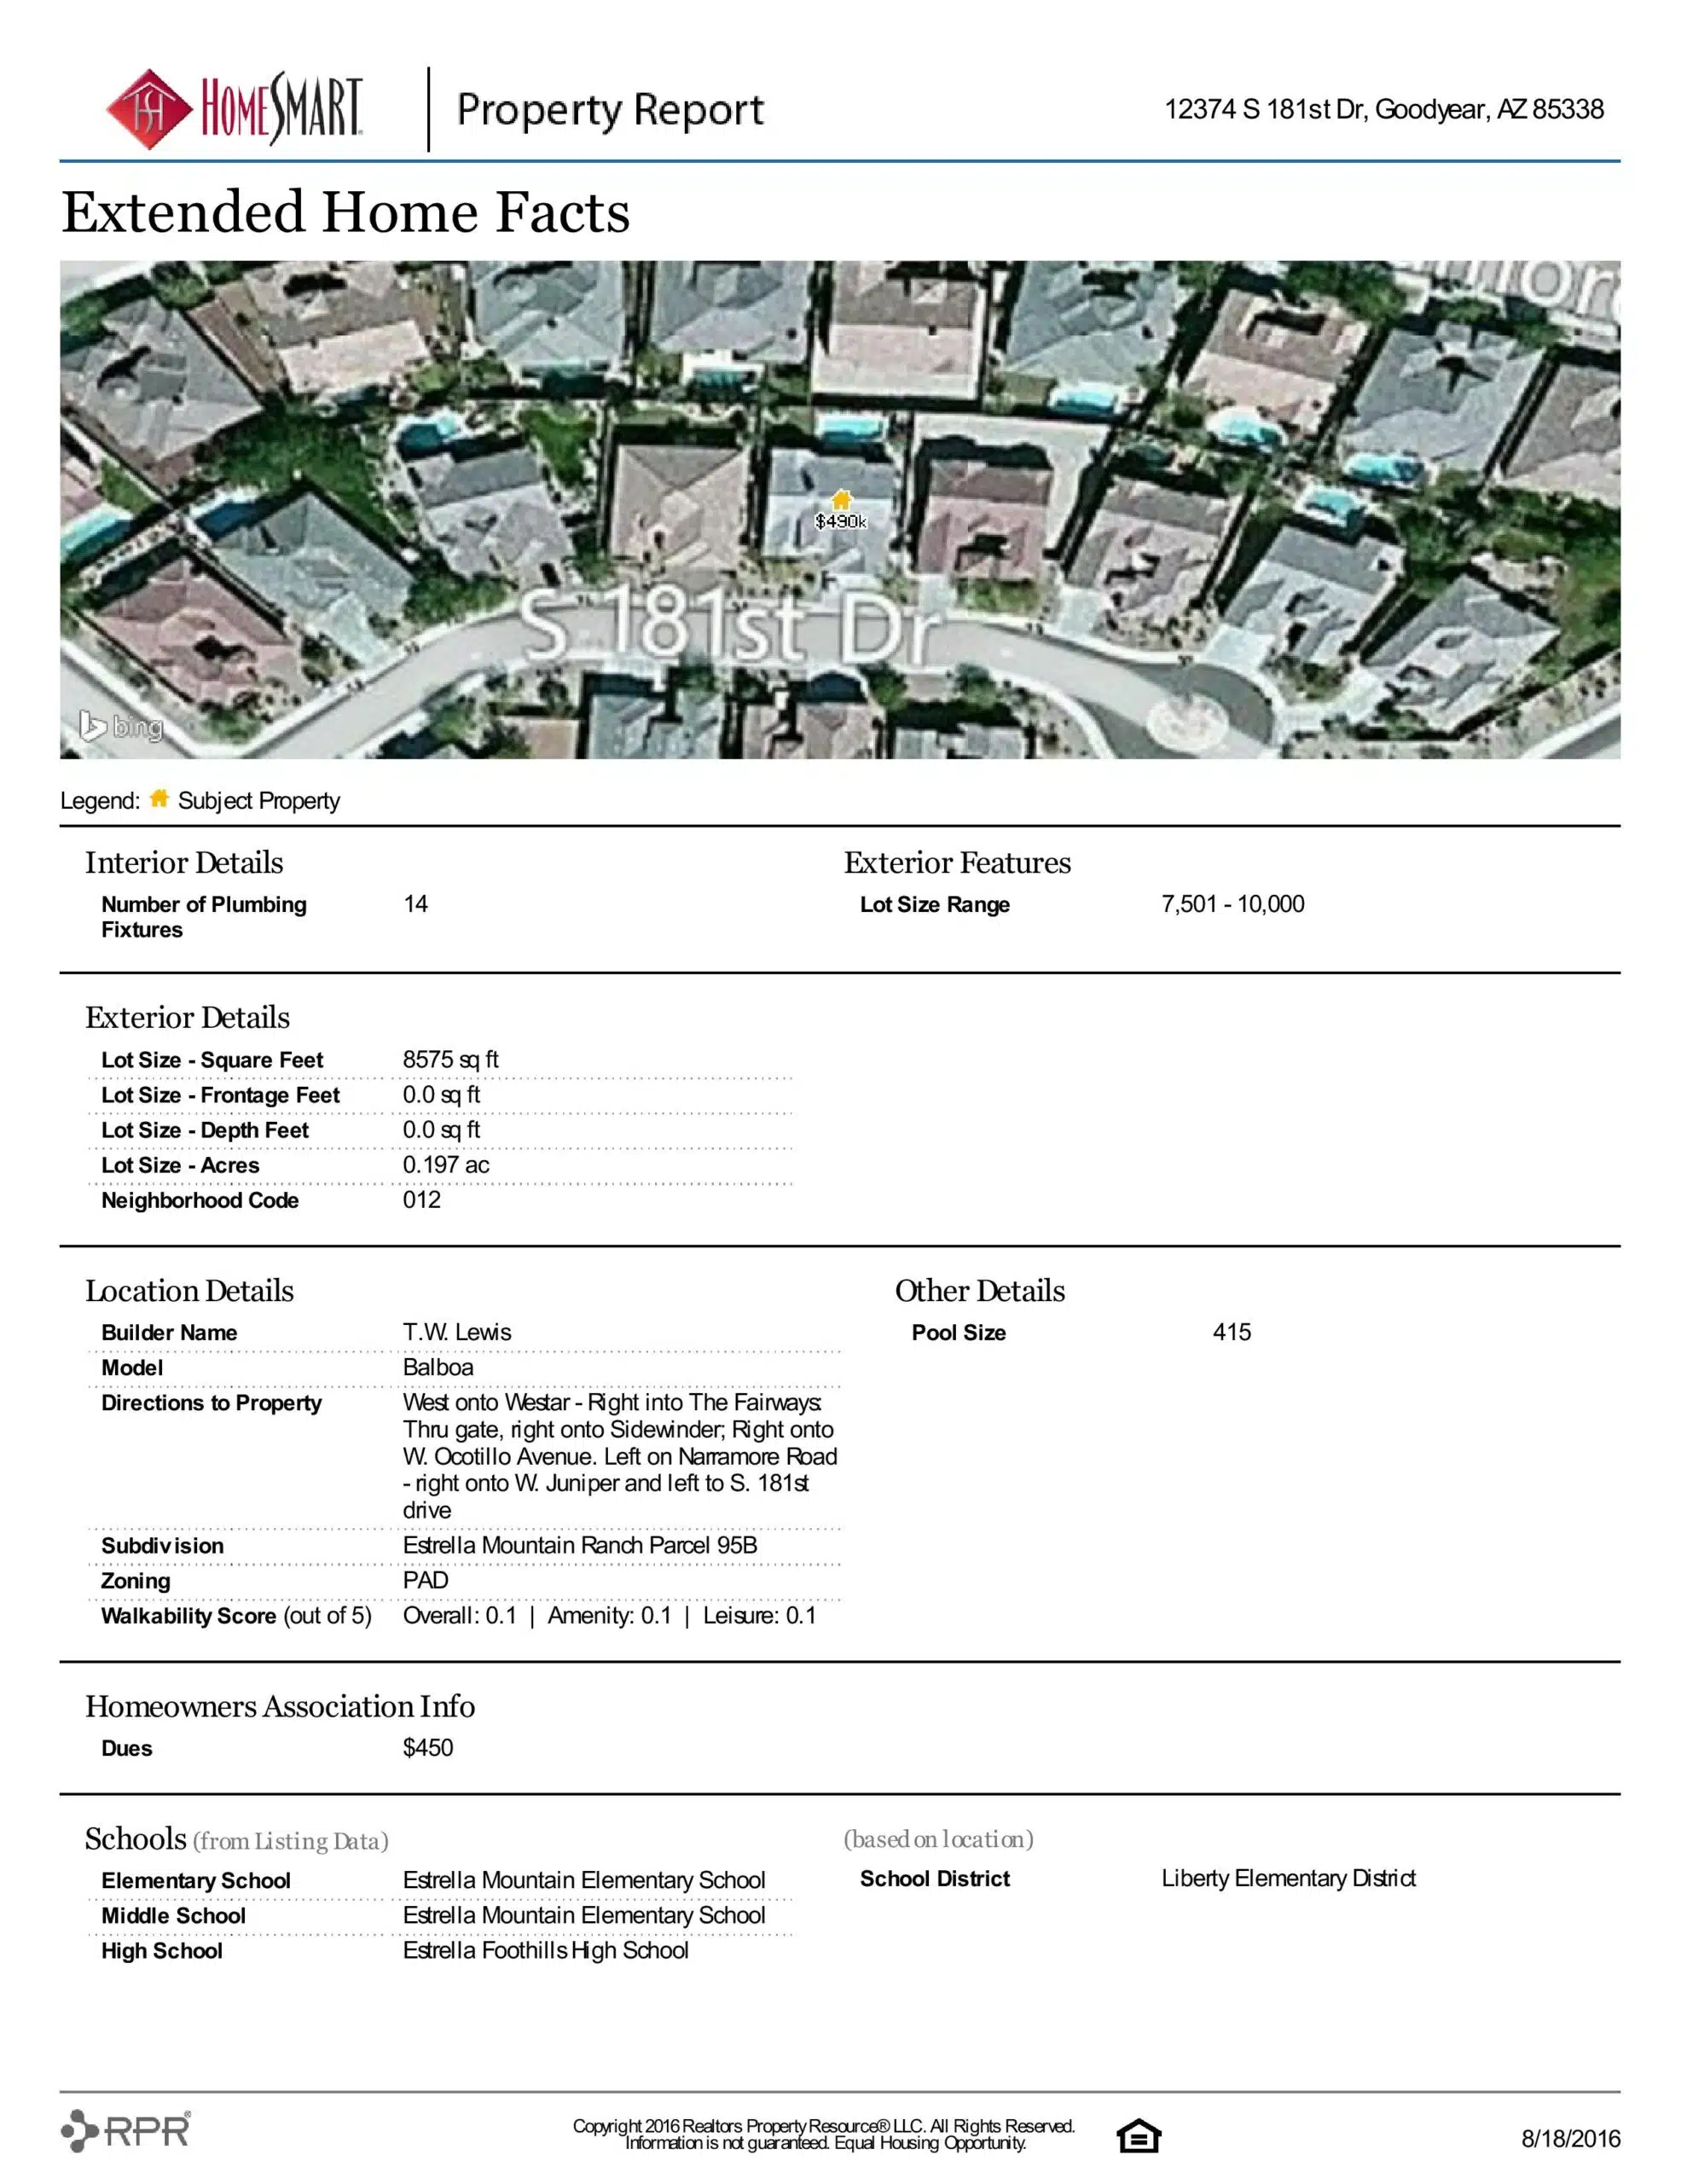 Property-Report_12374-S-181st-Dr-Goodyear-AZ-85338_2016-08-18-10-08-18-page-004